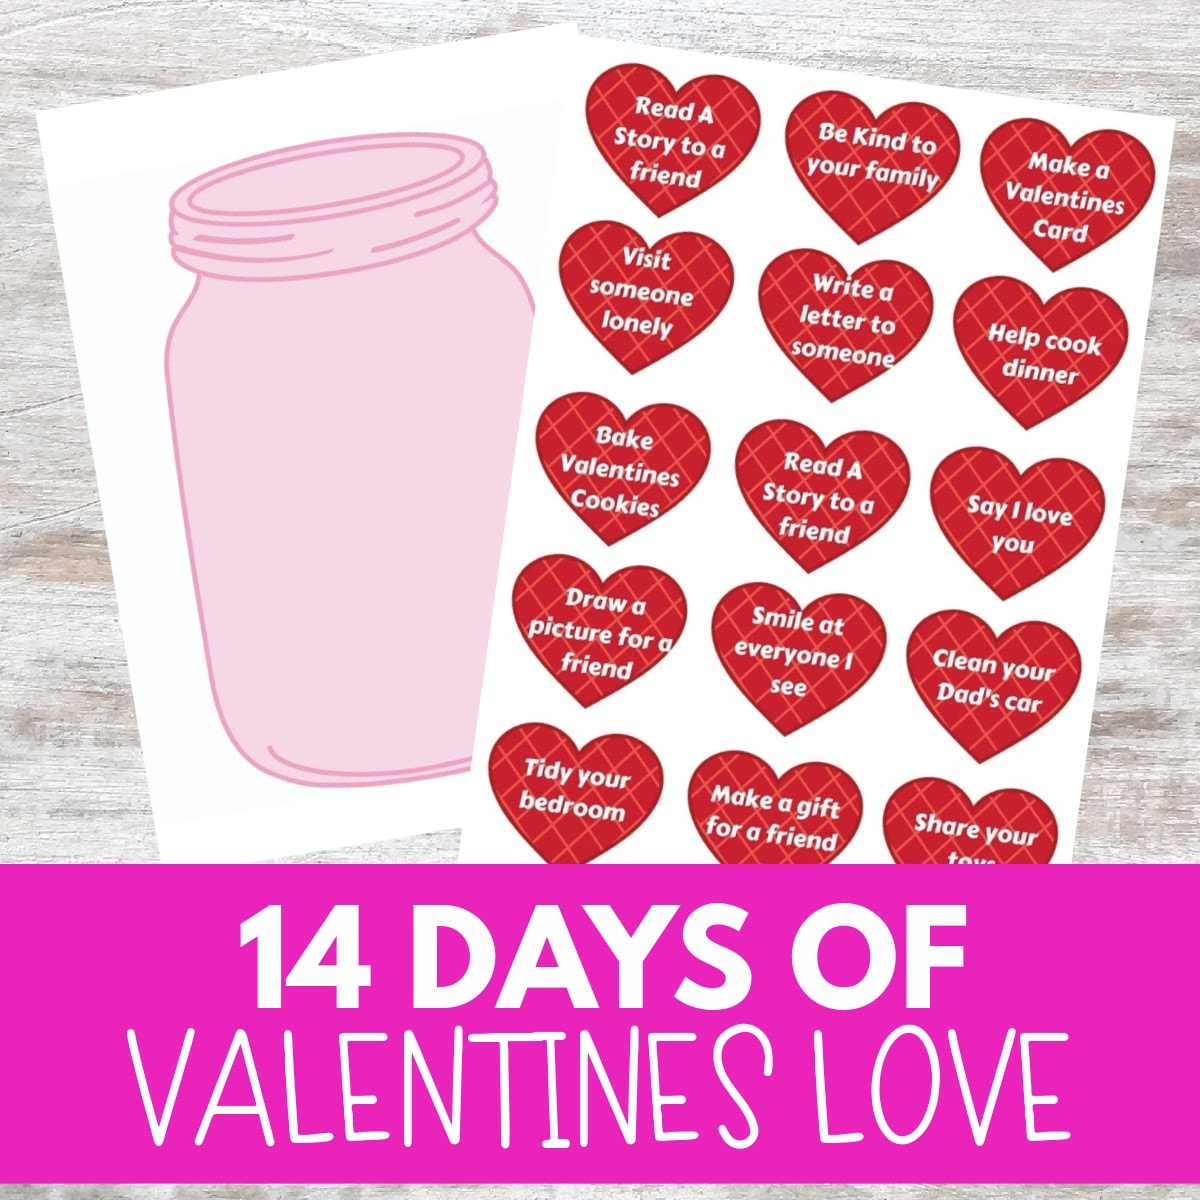 14 Days of Kindness Valentine’s Day Coupons